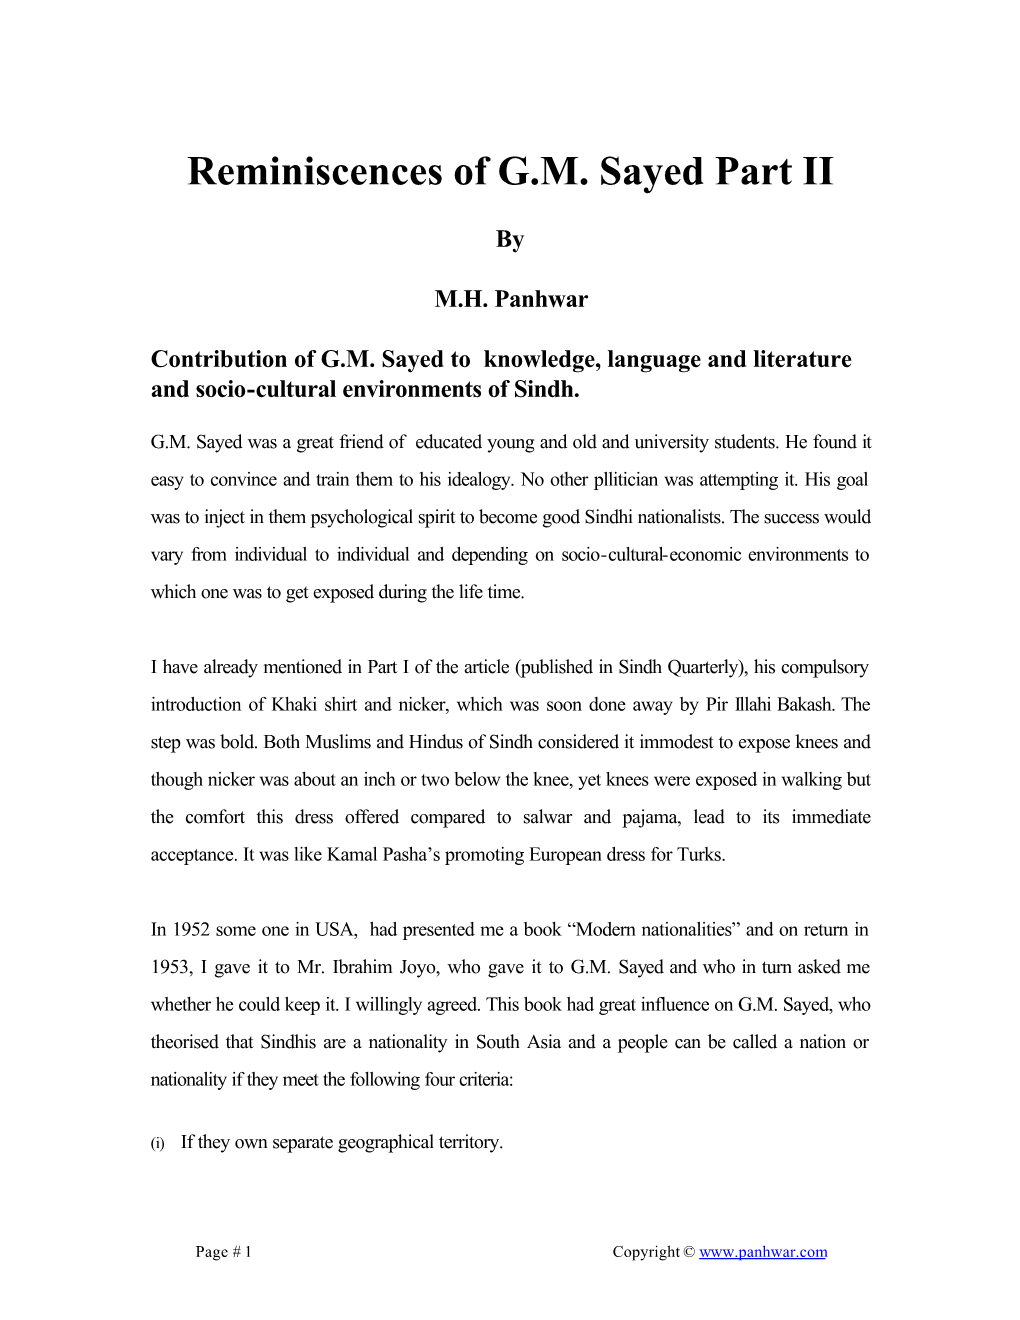 MY REMINISCENCES of G. M. SYED Part II